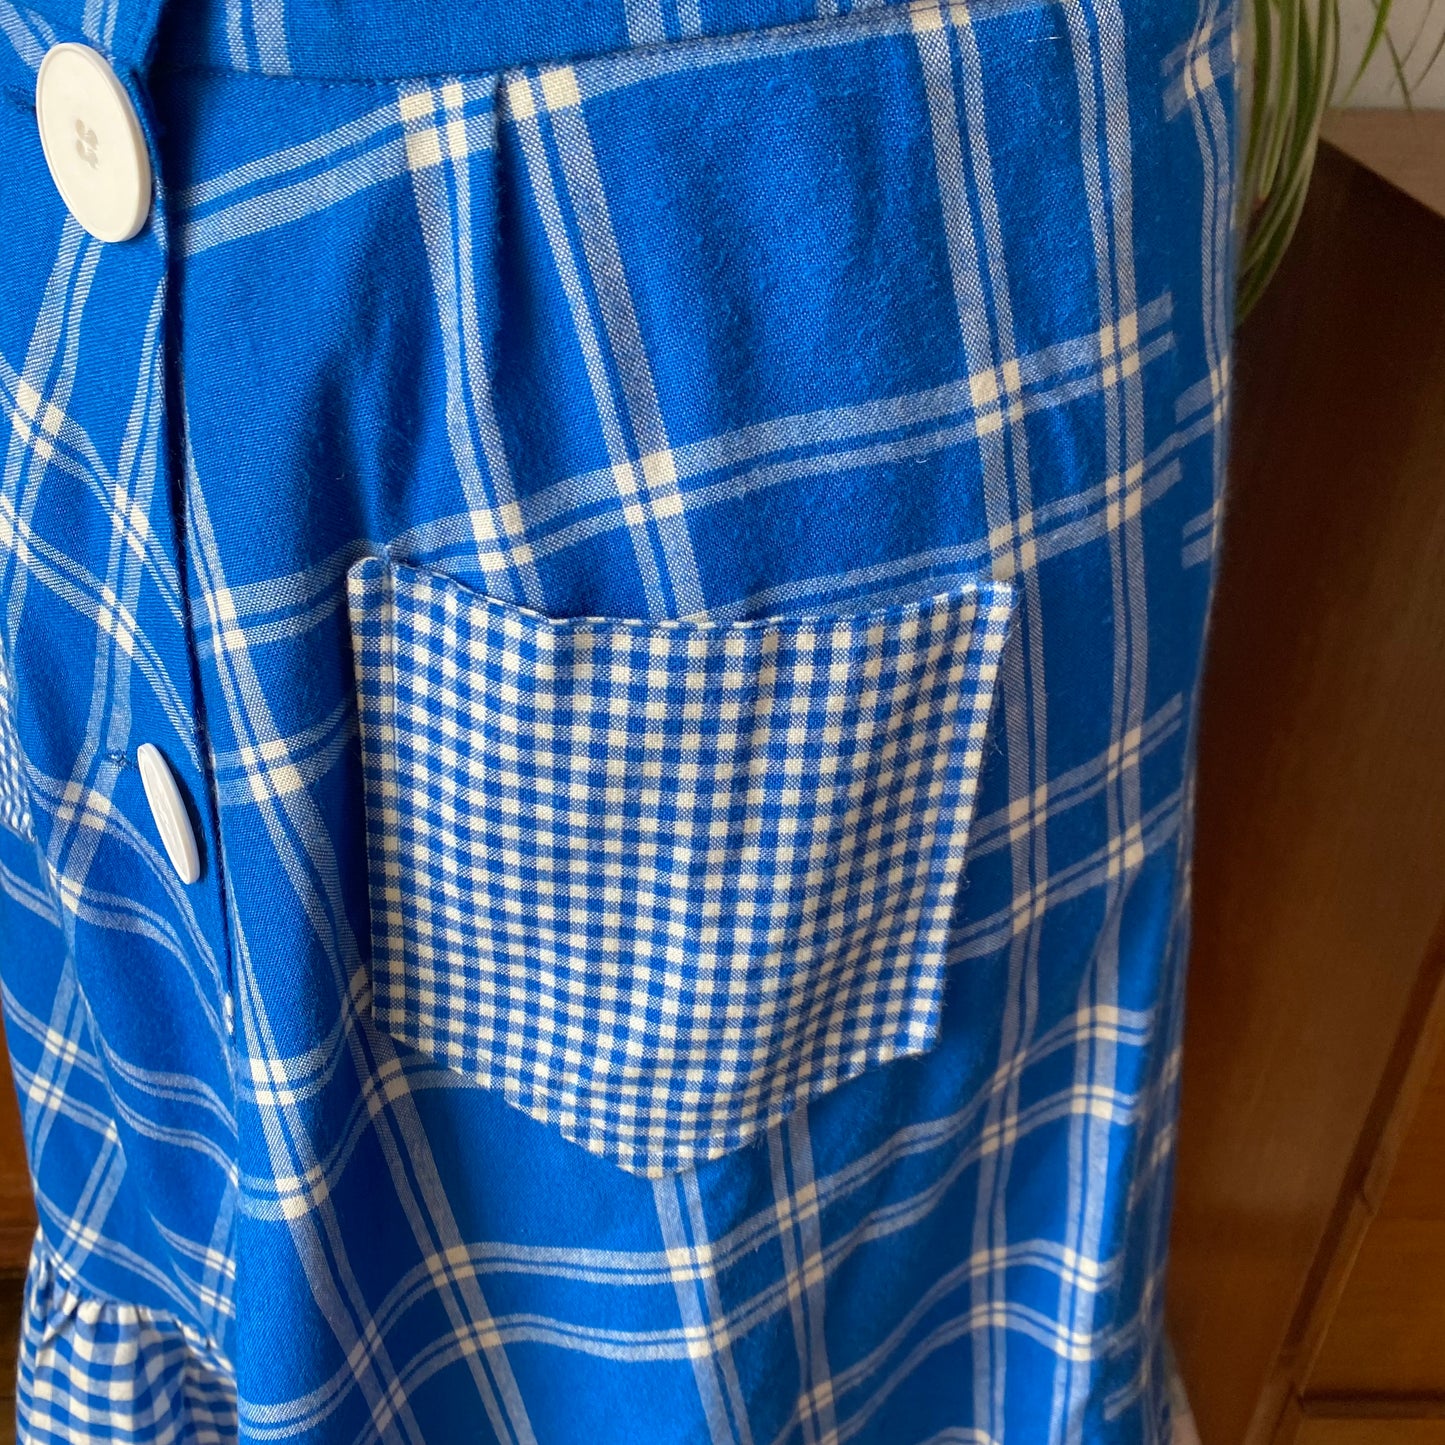 Vintage blue and white rockabilly style button down checked skirt. Approx UK size 18